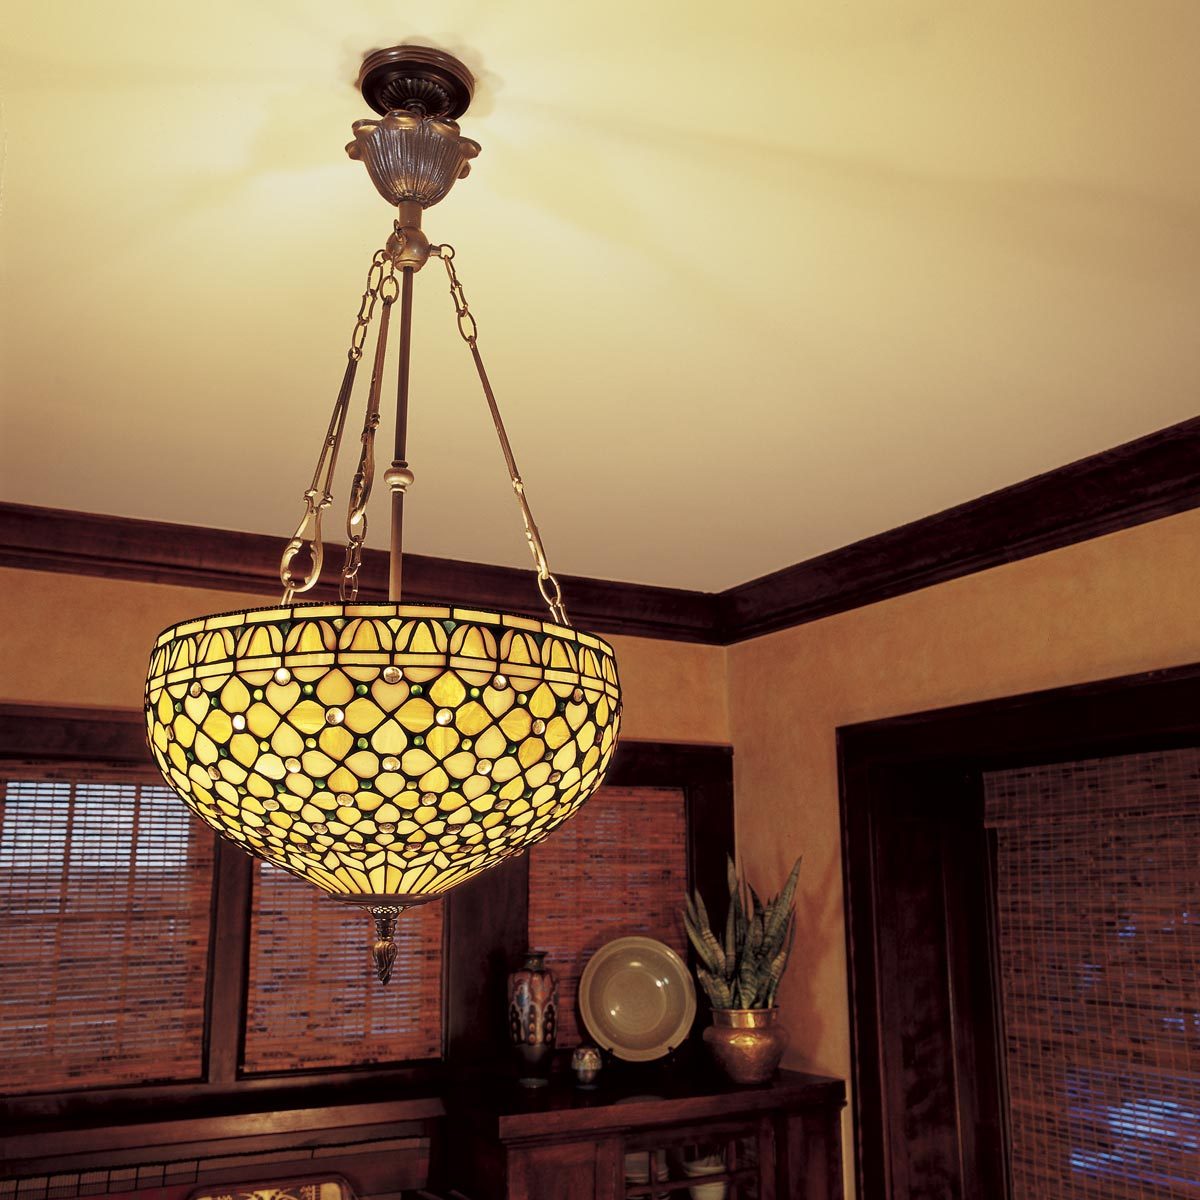 Ceiling Light Electrical Box For Heavy Chandelier ...